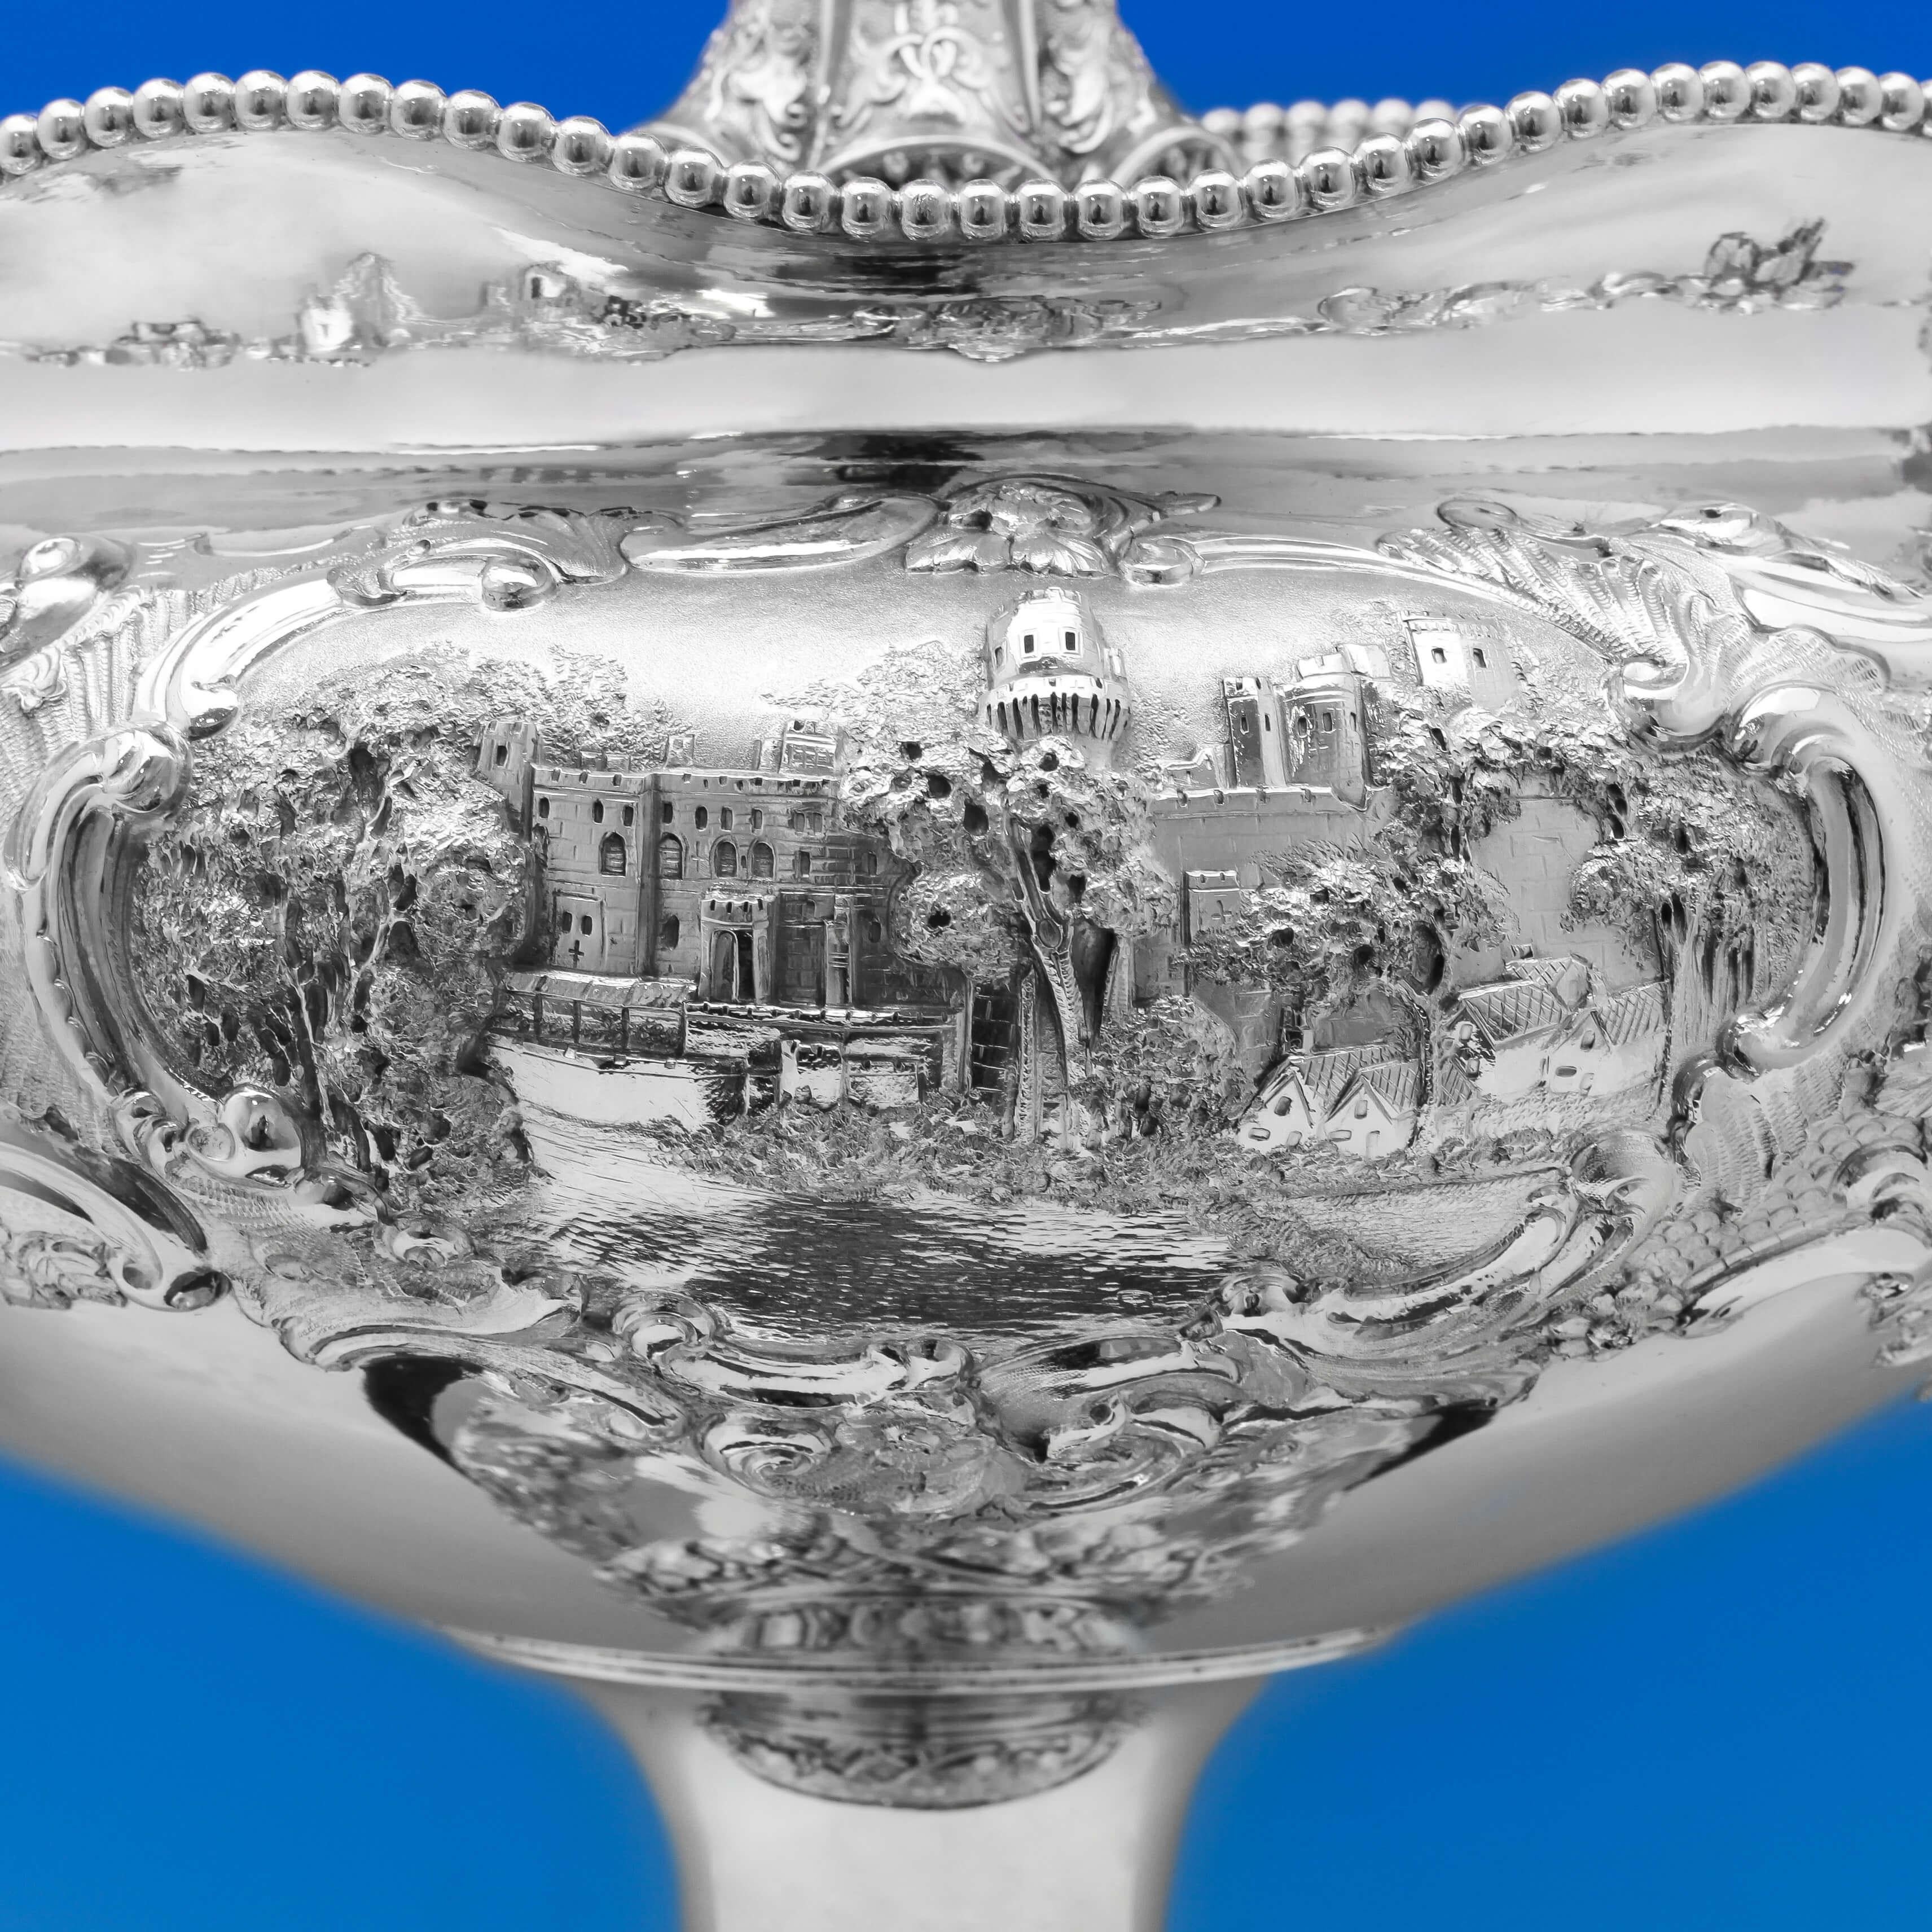 Hallmarked in London in 1876 by Robert Hennell III, this wonderful, Victorian, antique, sterling silver centrepiece, was originally the Warwick Cup race trophy, and stands on a wooden plinth with a beaded band and engraved presentation inscription.